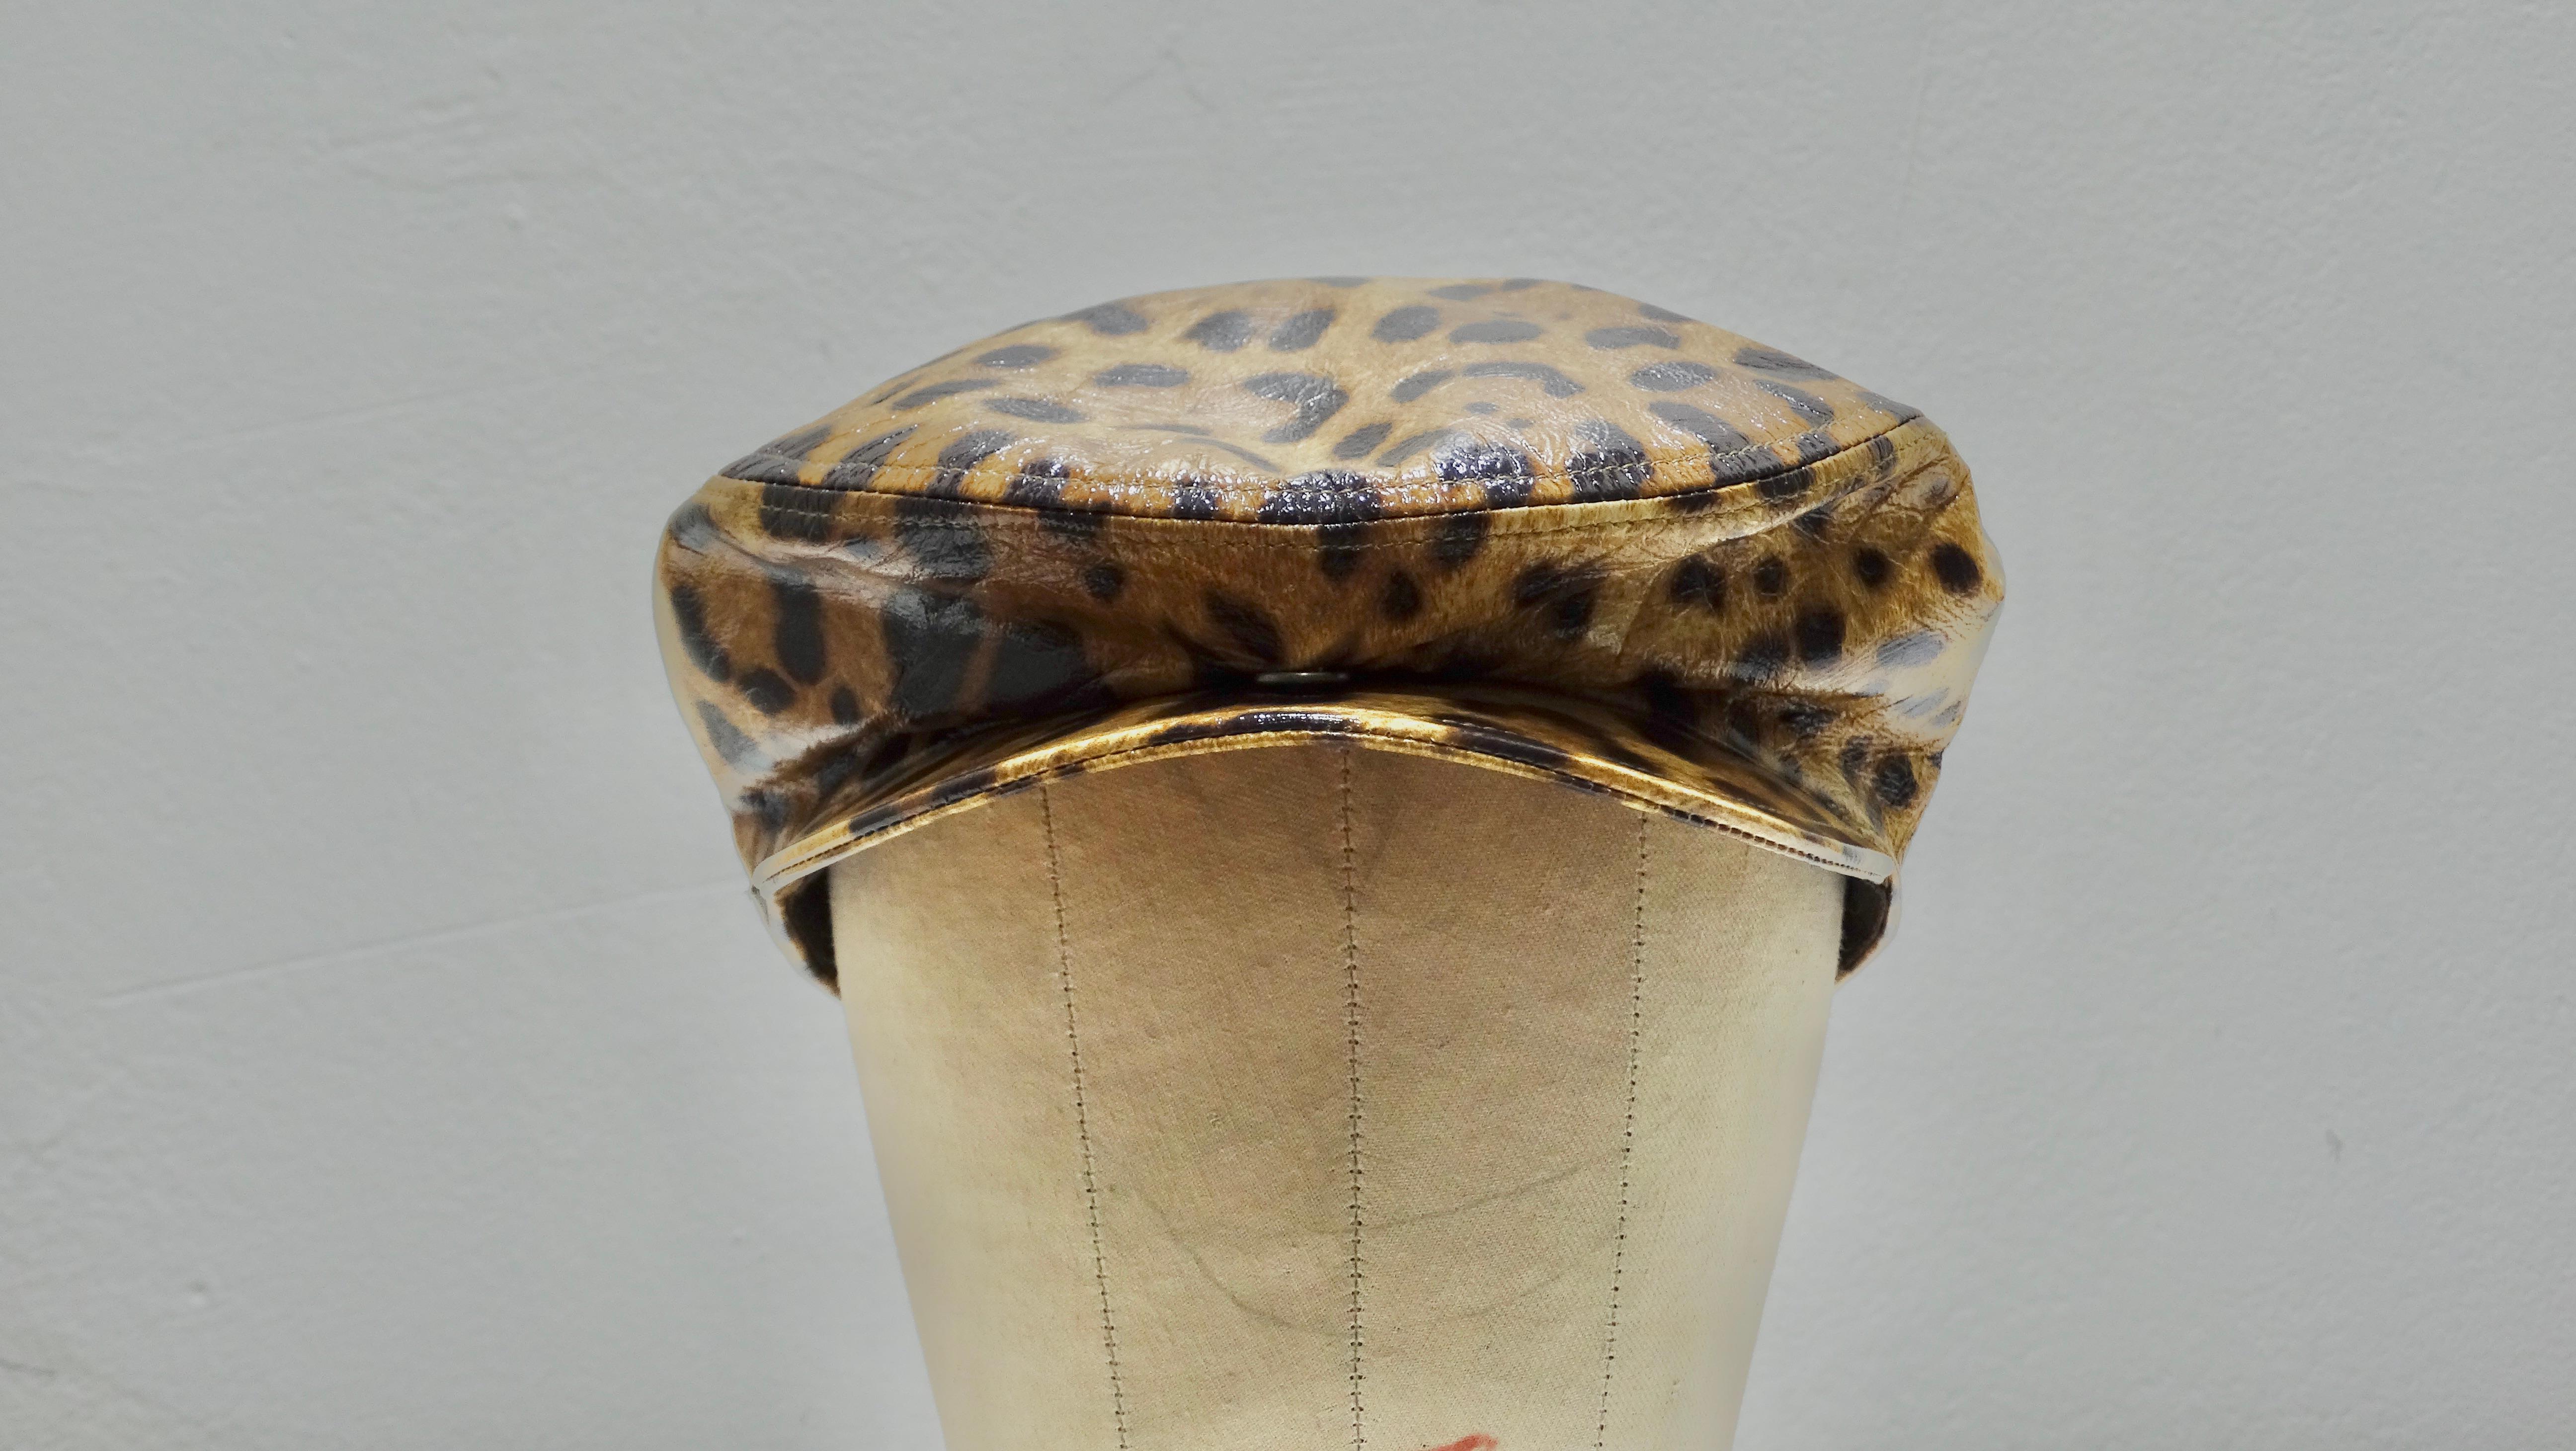 Dolce & Gabbana Leather Cheetah Print Fisherman's Cap  In Excellent Condition For Sale In Scottsdale, AZ